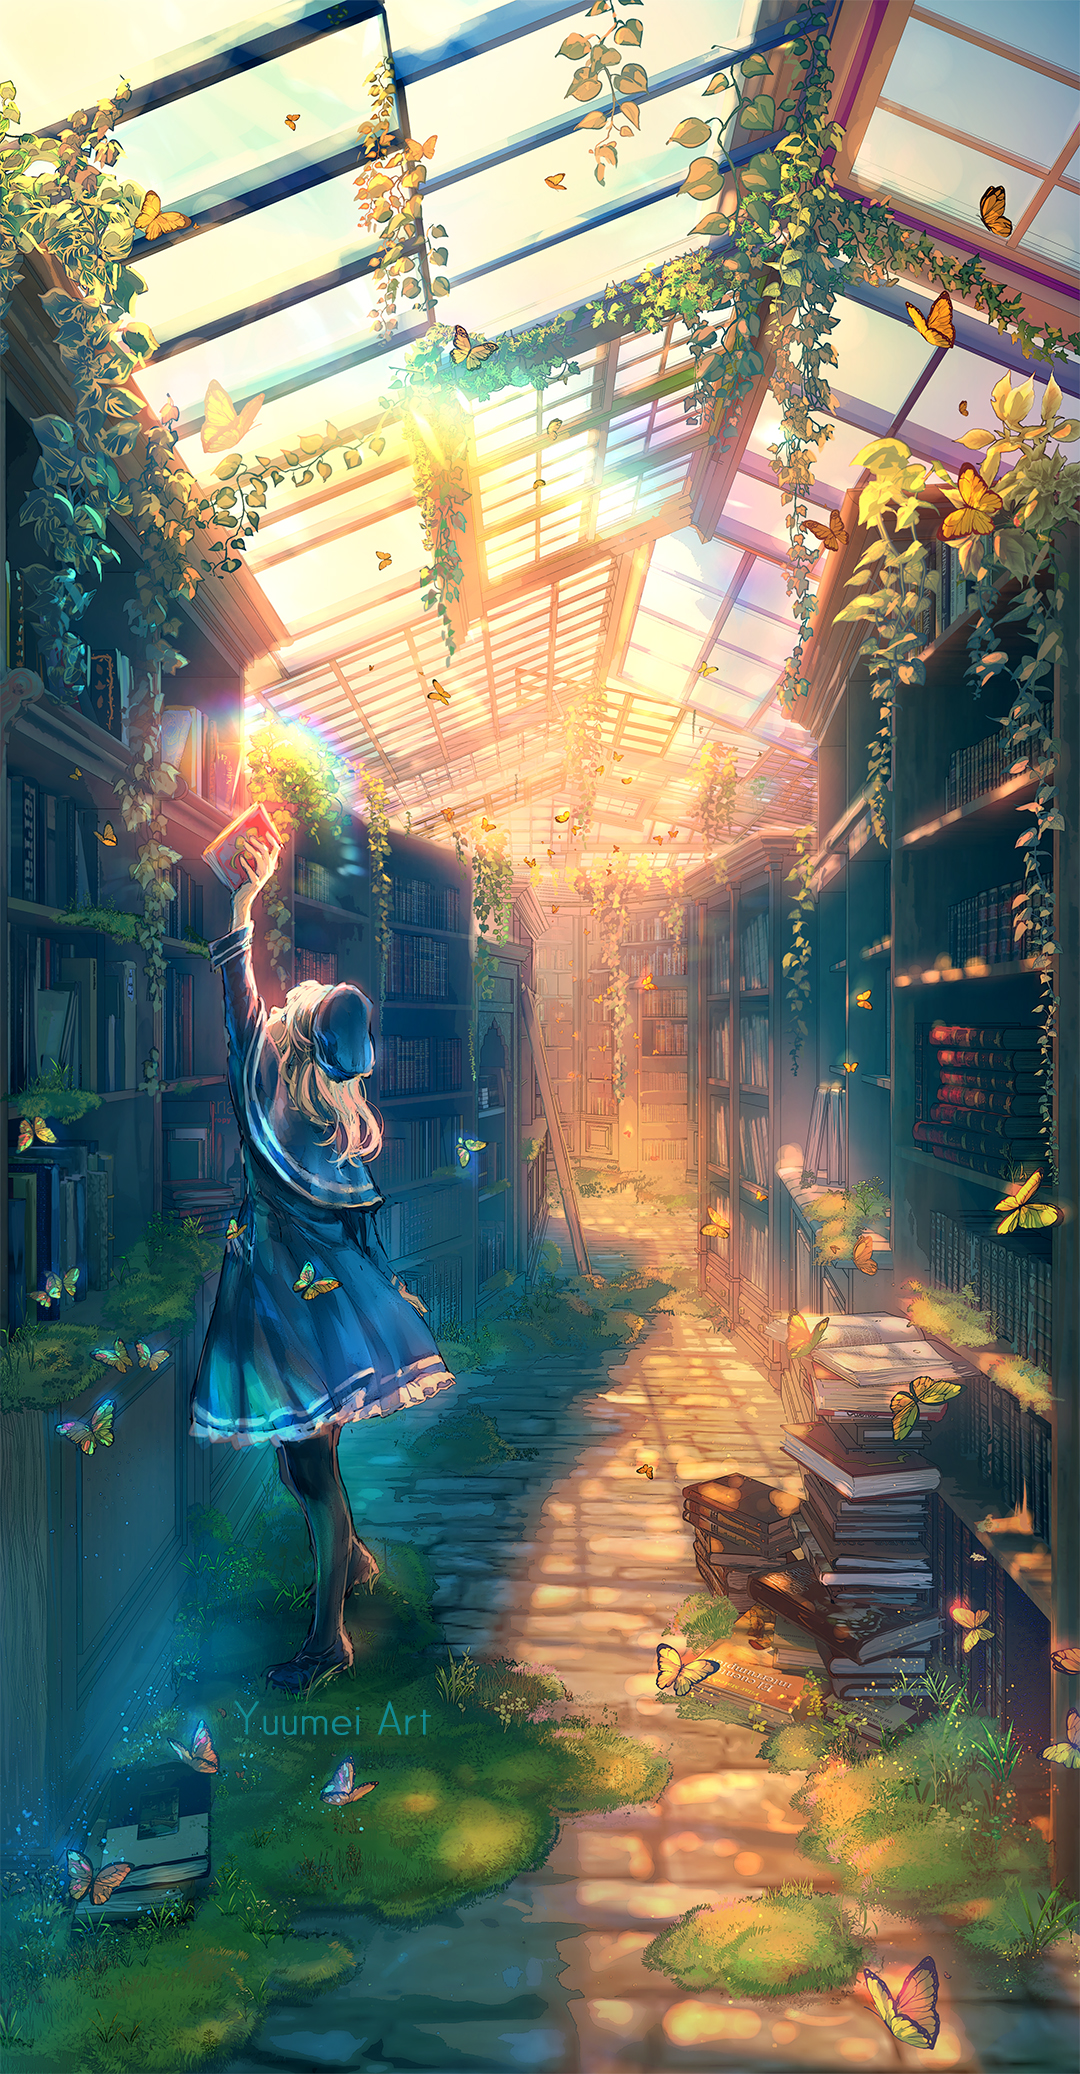 Welcome to Nevermore by Yuumei